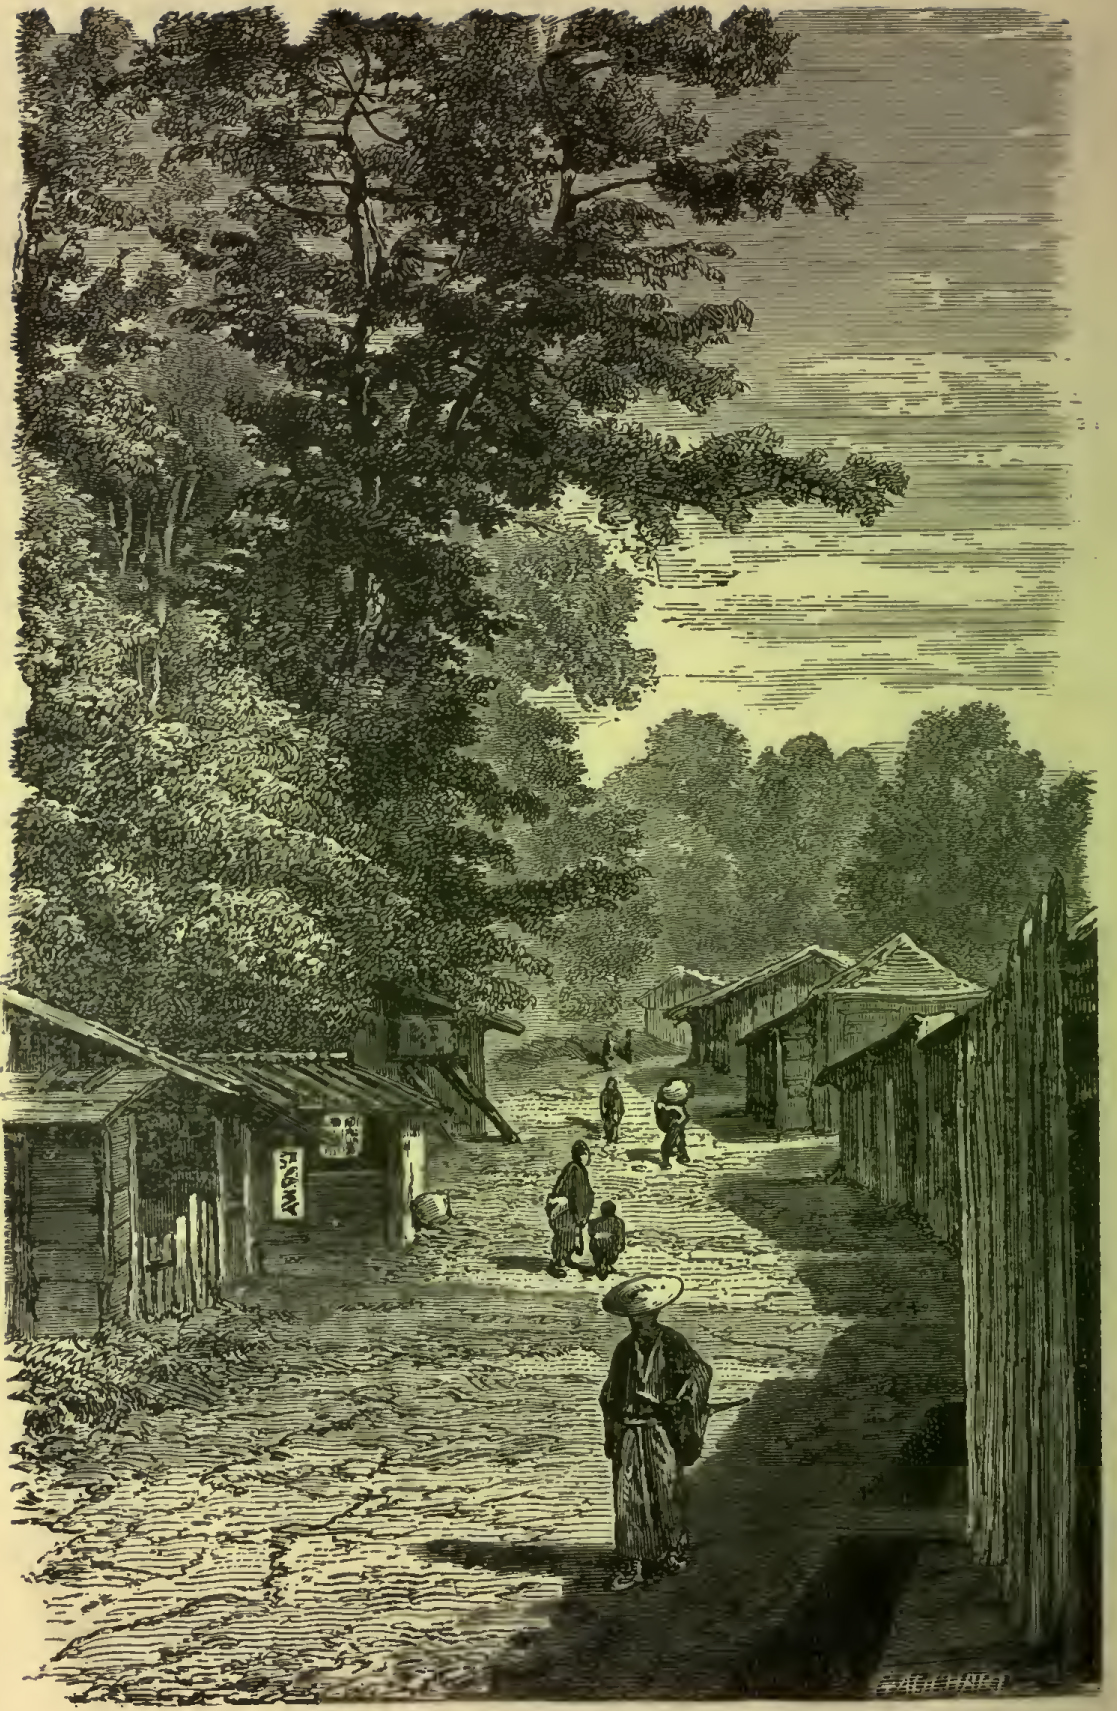 Street scene with small buildings, unpaved street, pedestrians. Forest background.